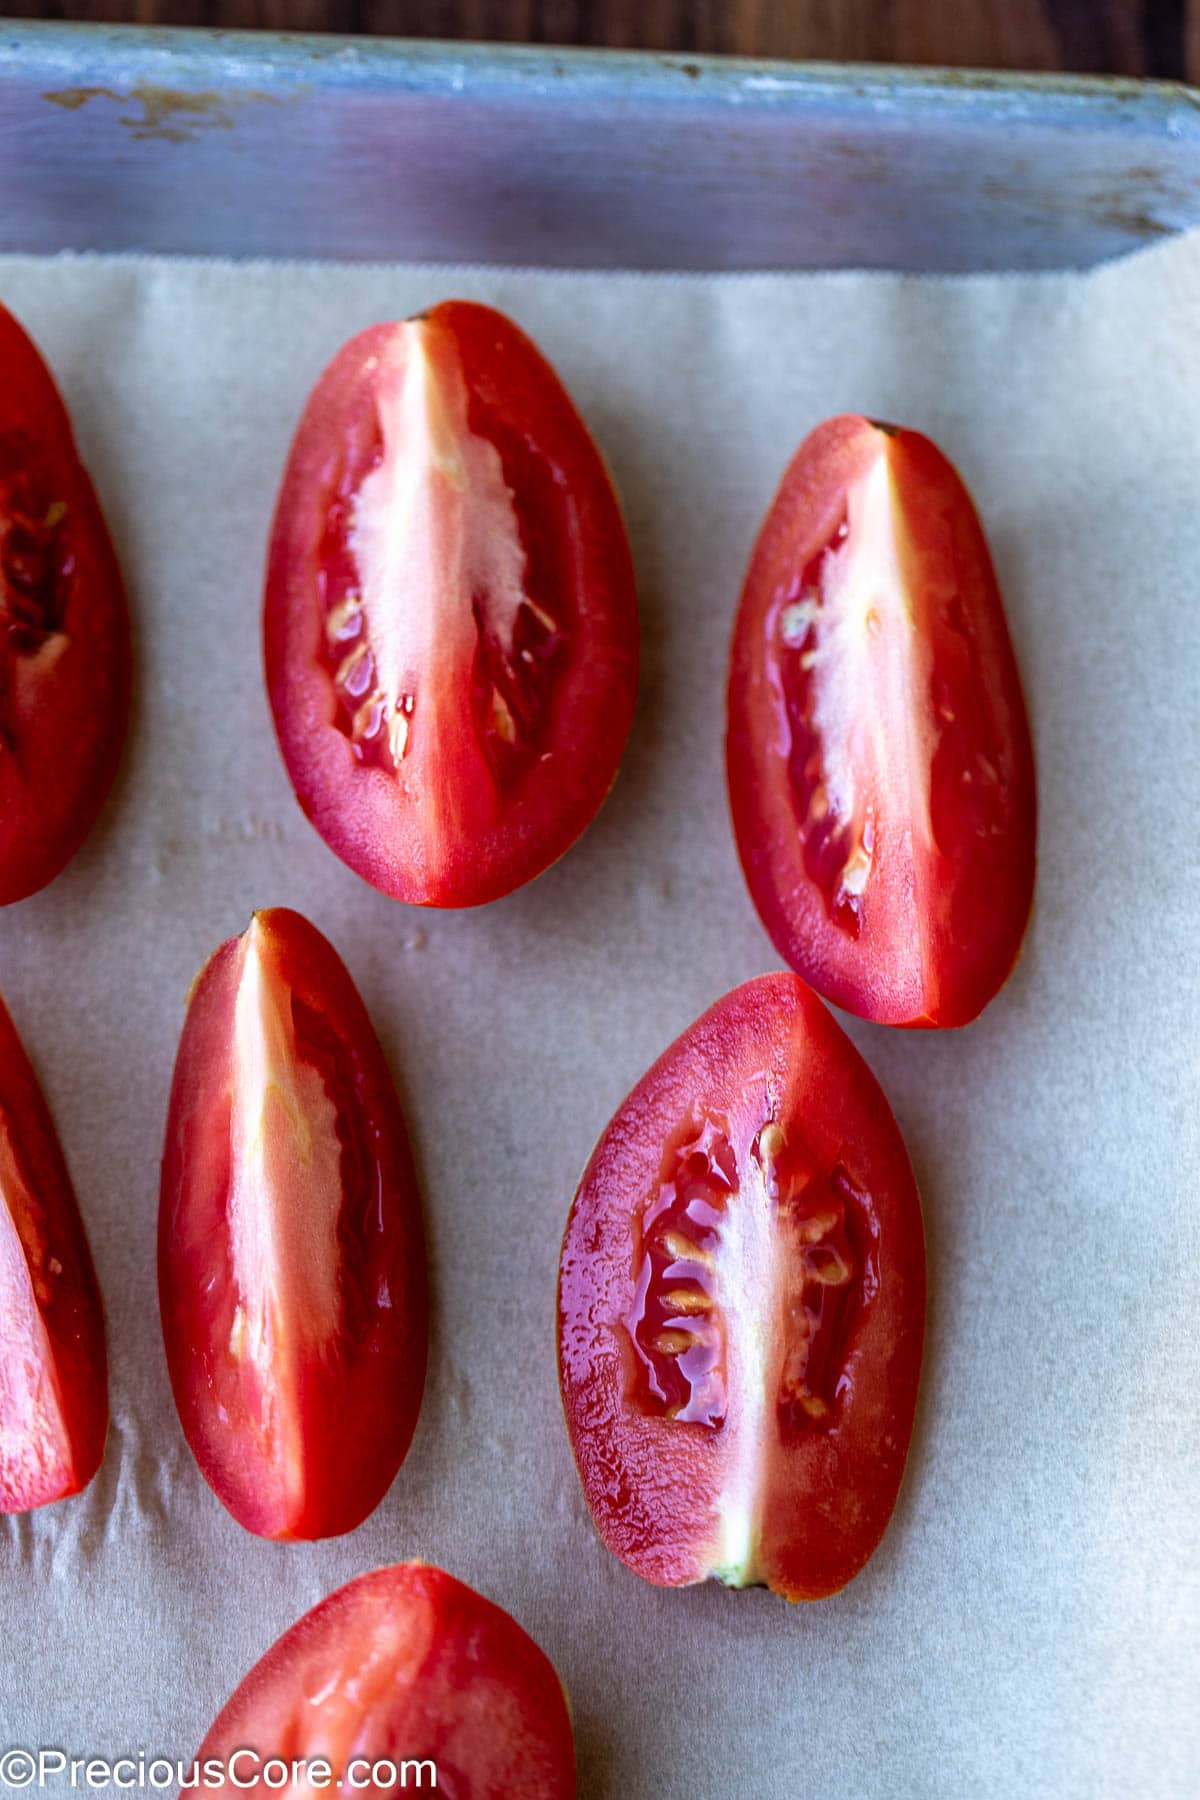 Roma tomatoes cut into quarters on parchment paper.